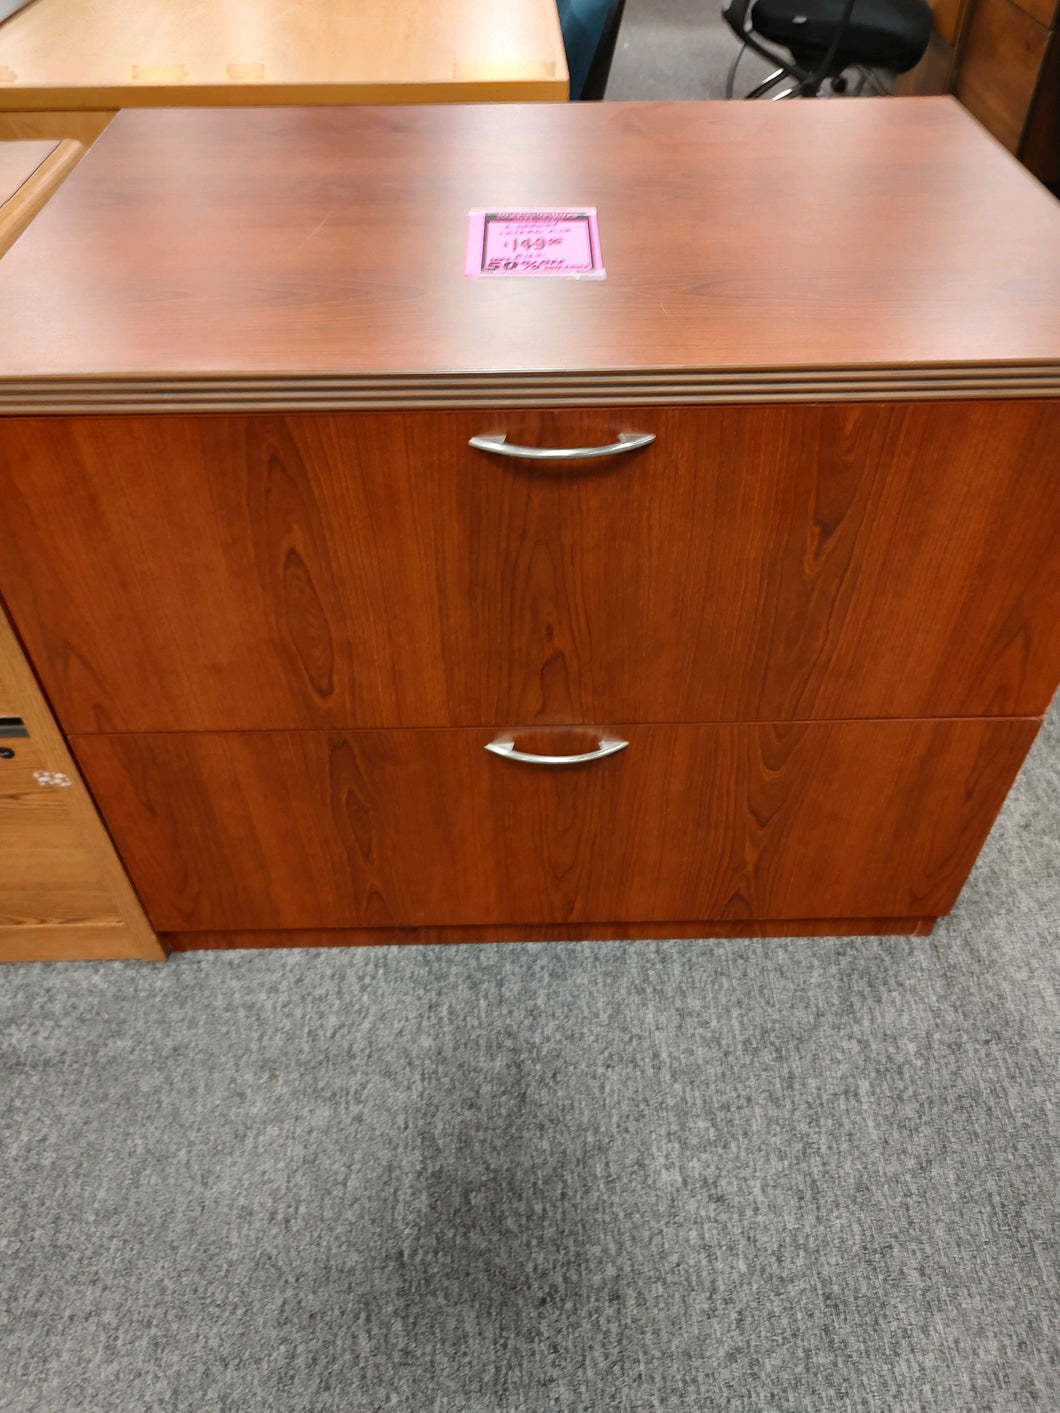 R1621 Cherry 2 Drawer Used Lateral File $74.98 - 1 Only!